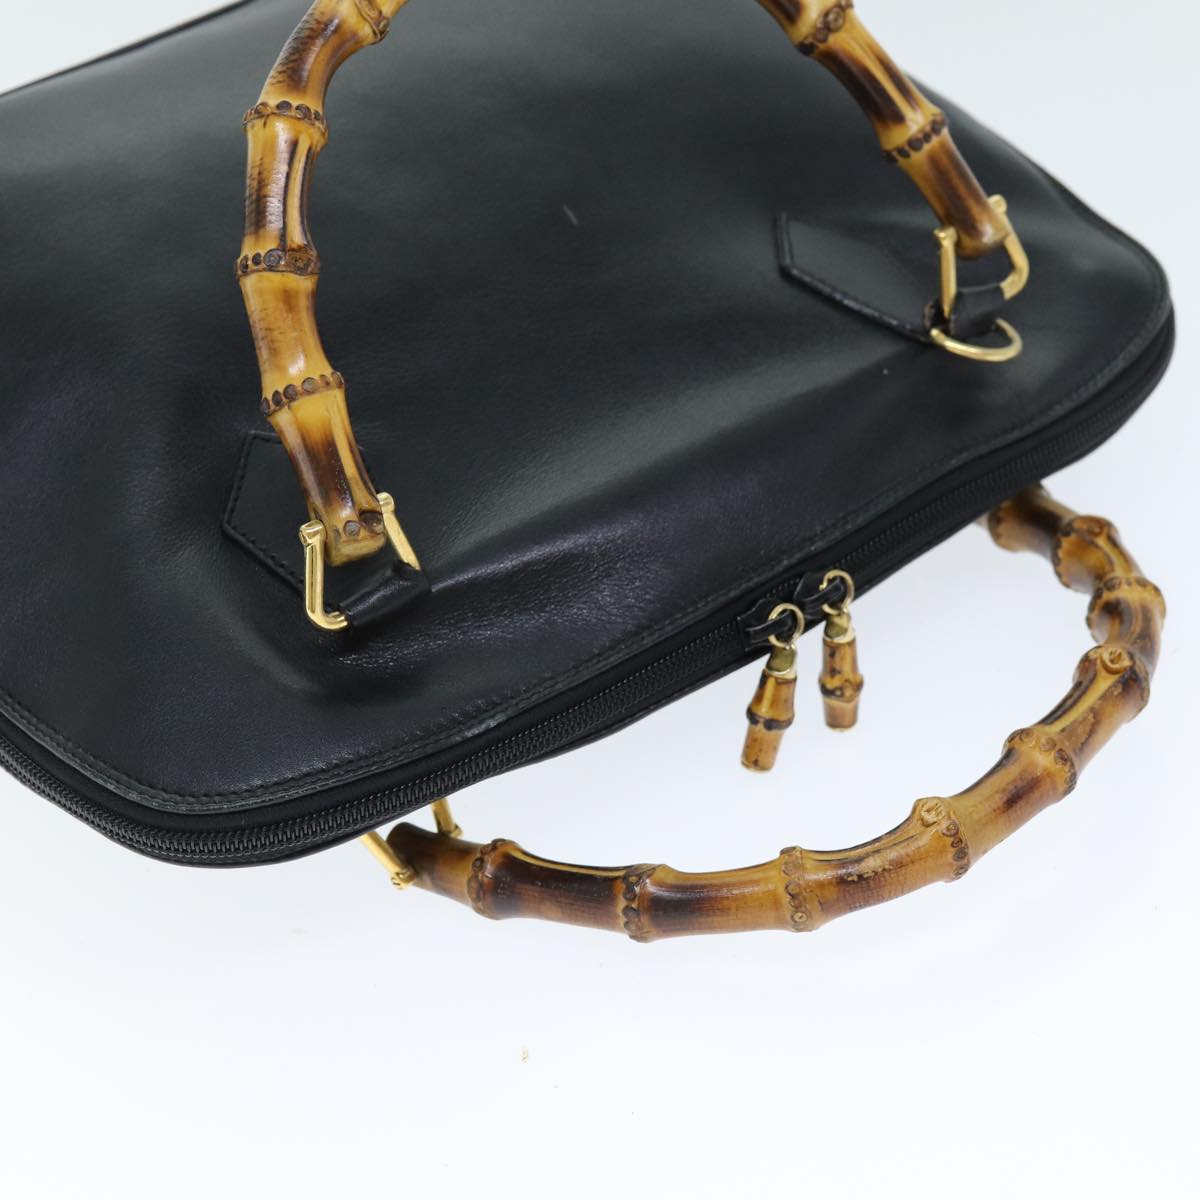 GUCCI Bamboo Hand Bag Leather 2way Black 000 1186 0289 Auth 75113